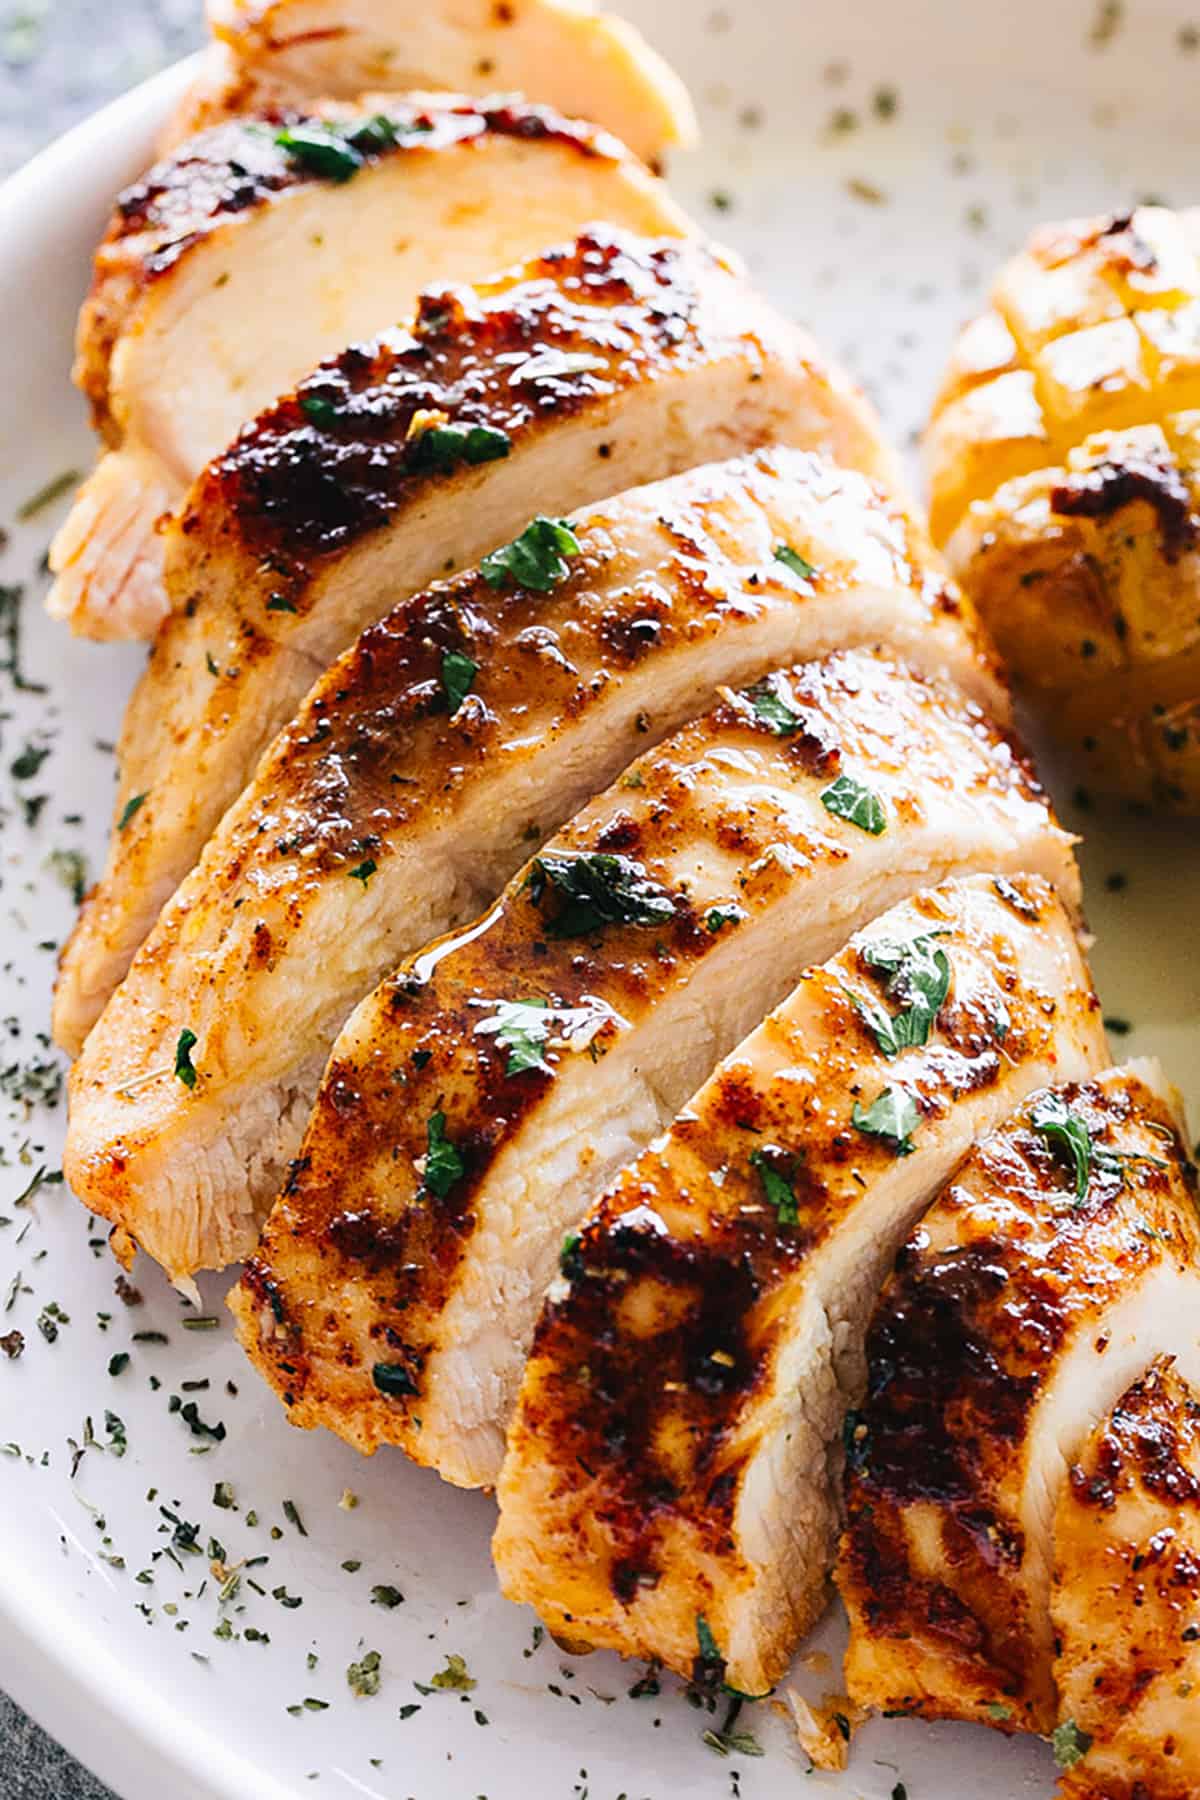 oven baked chicken breast cut into horizontal slices and set on a white dinner plate.